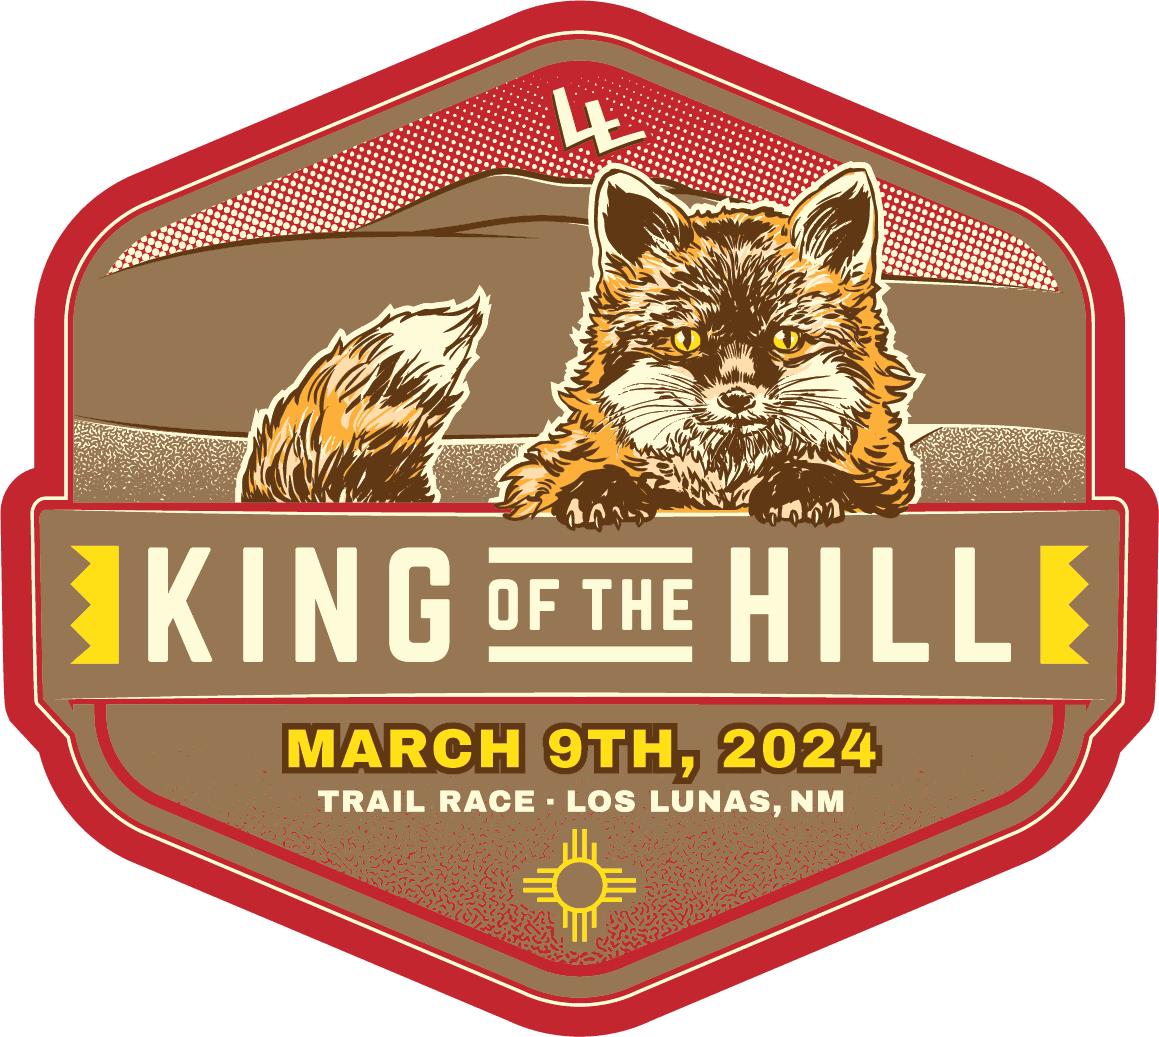 King of the Hill Trail Race logo